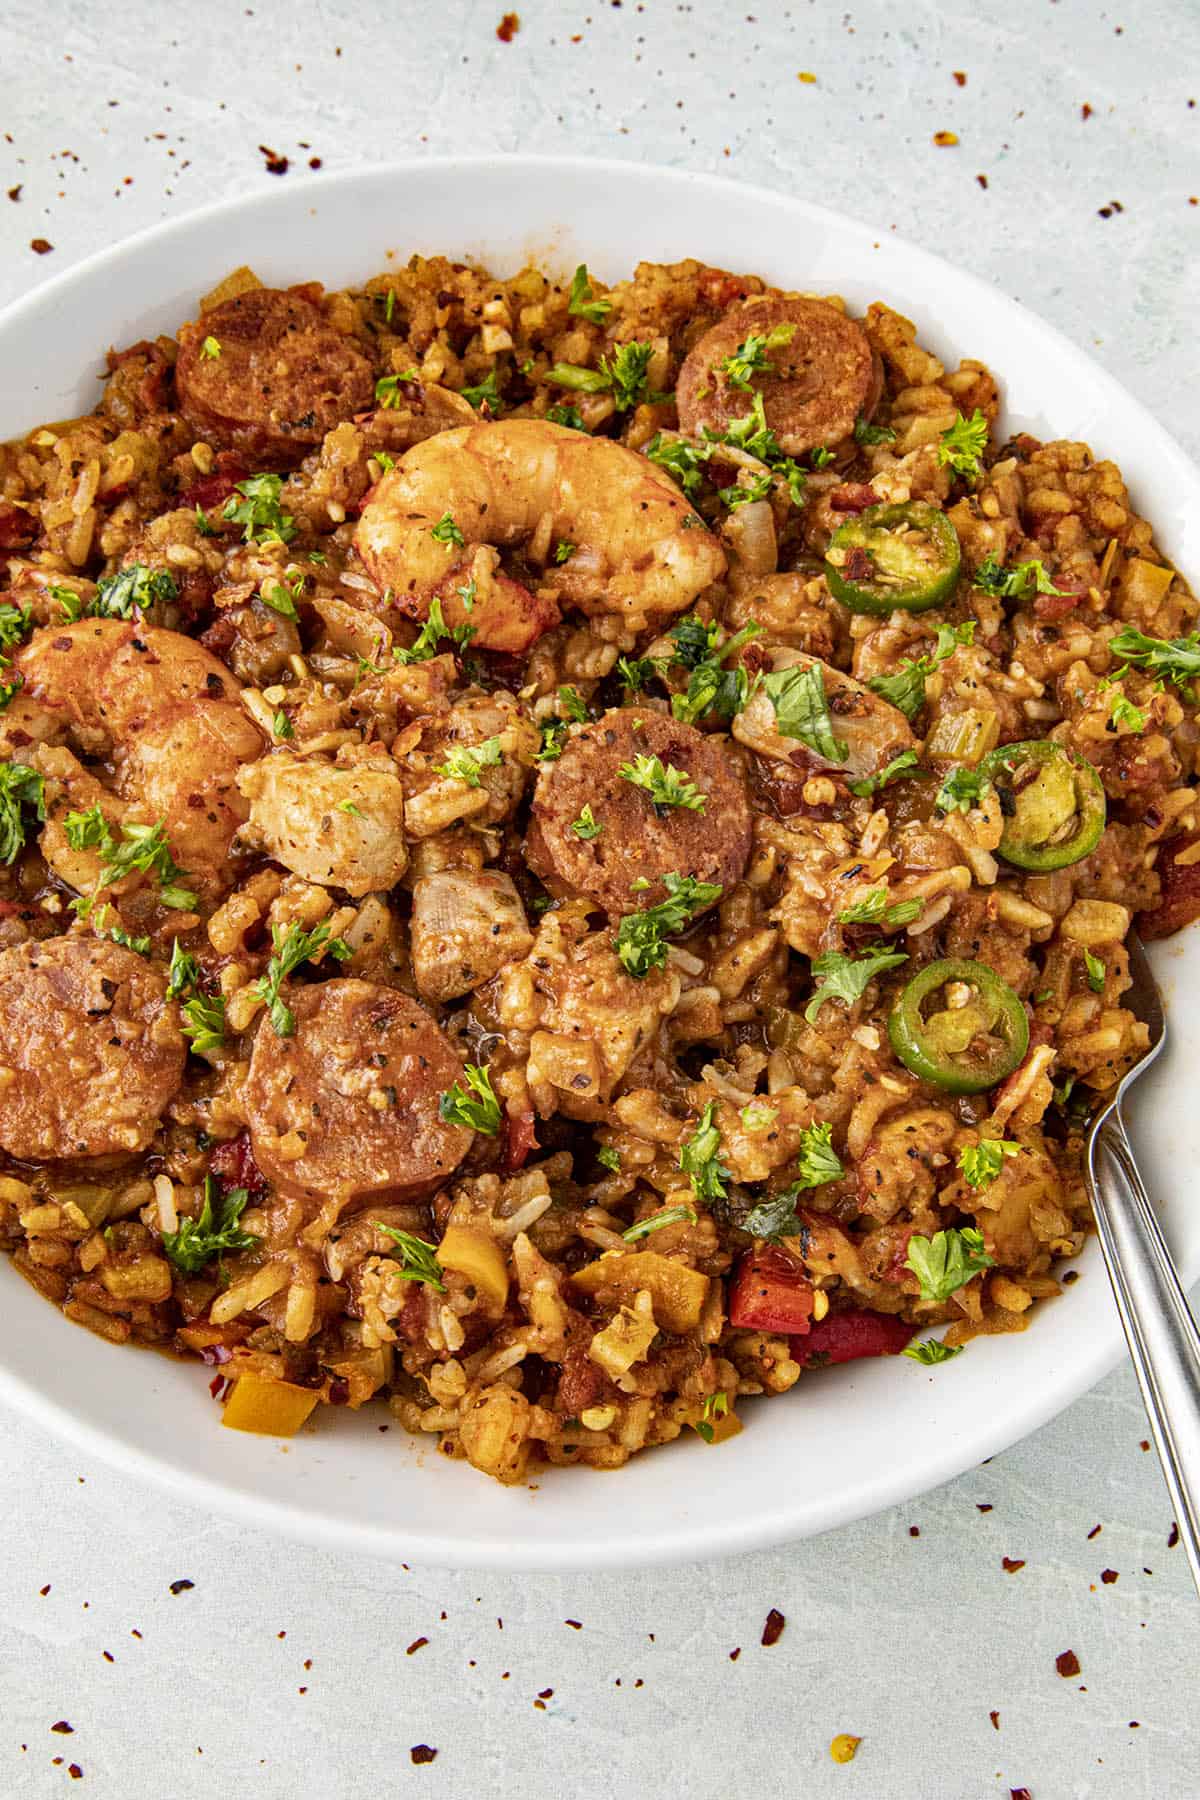 Delicious jambalaya in a bowl with a fork